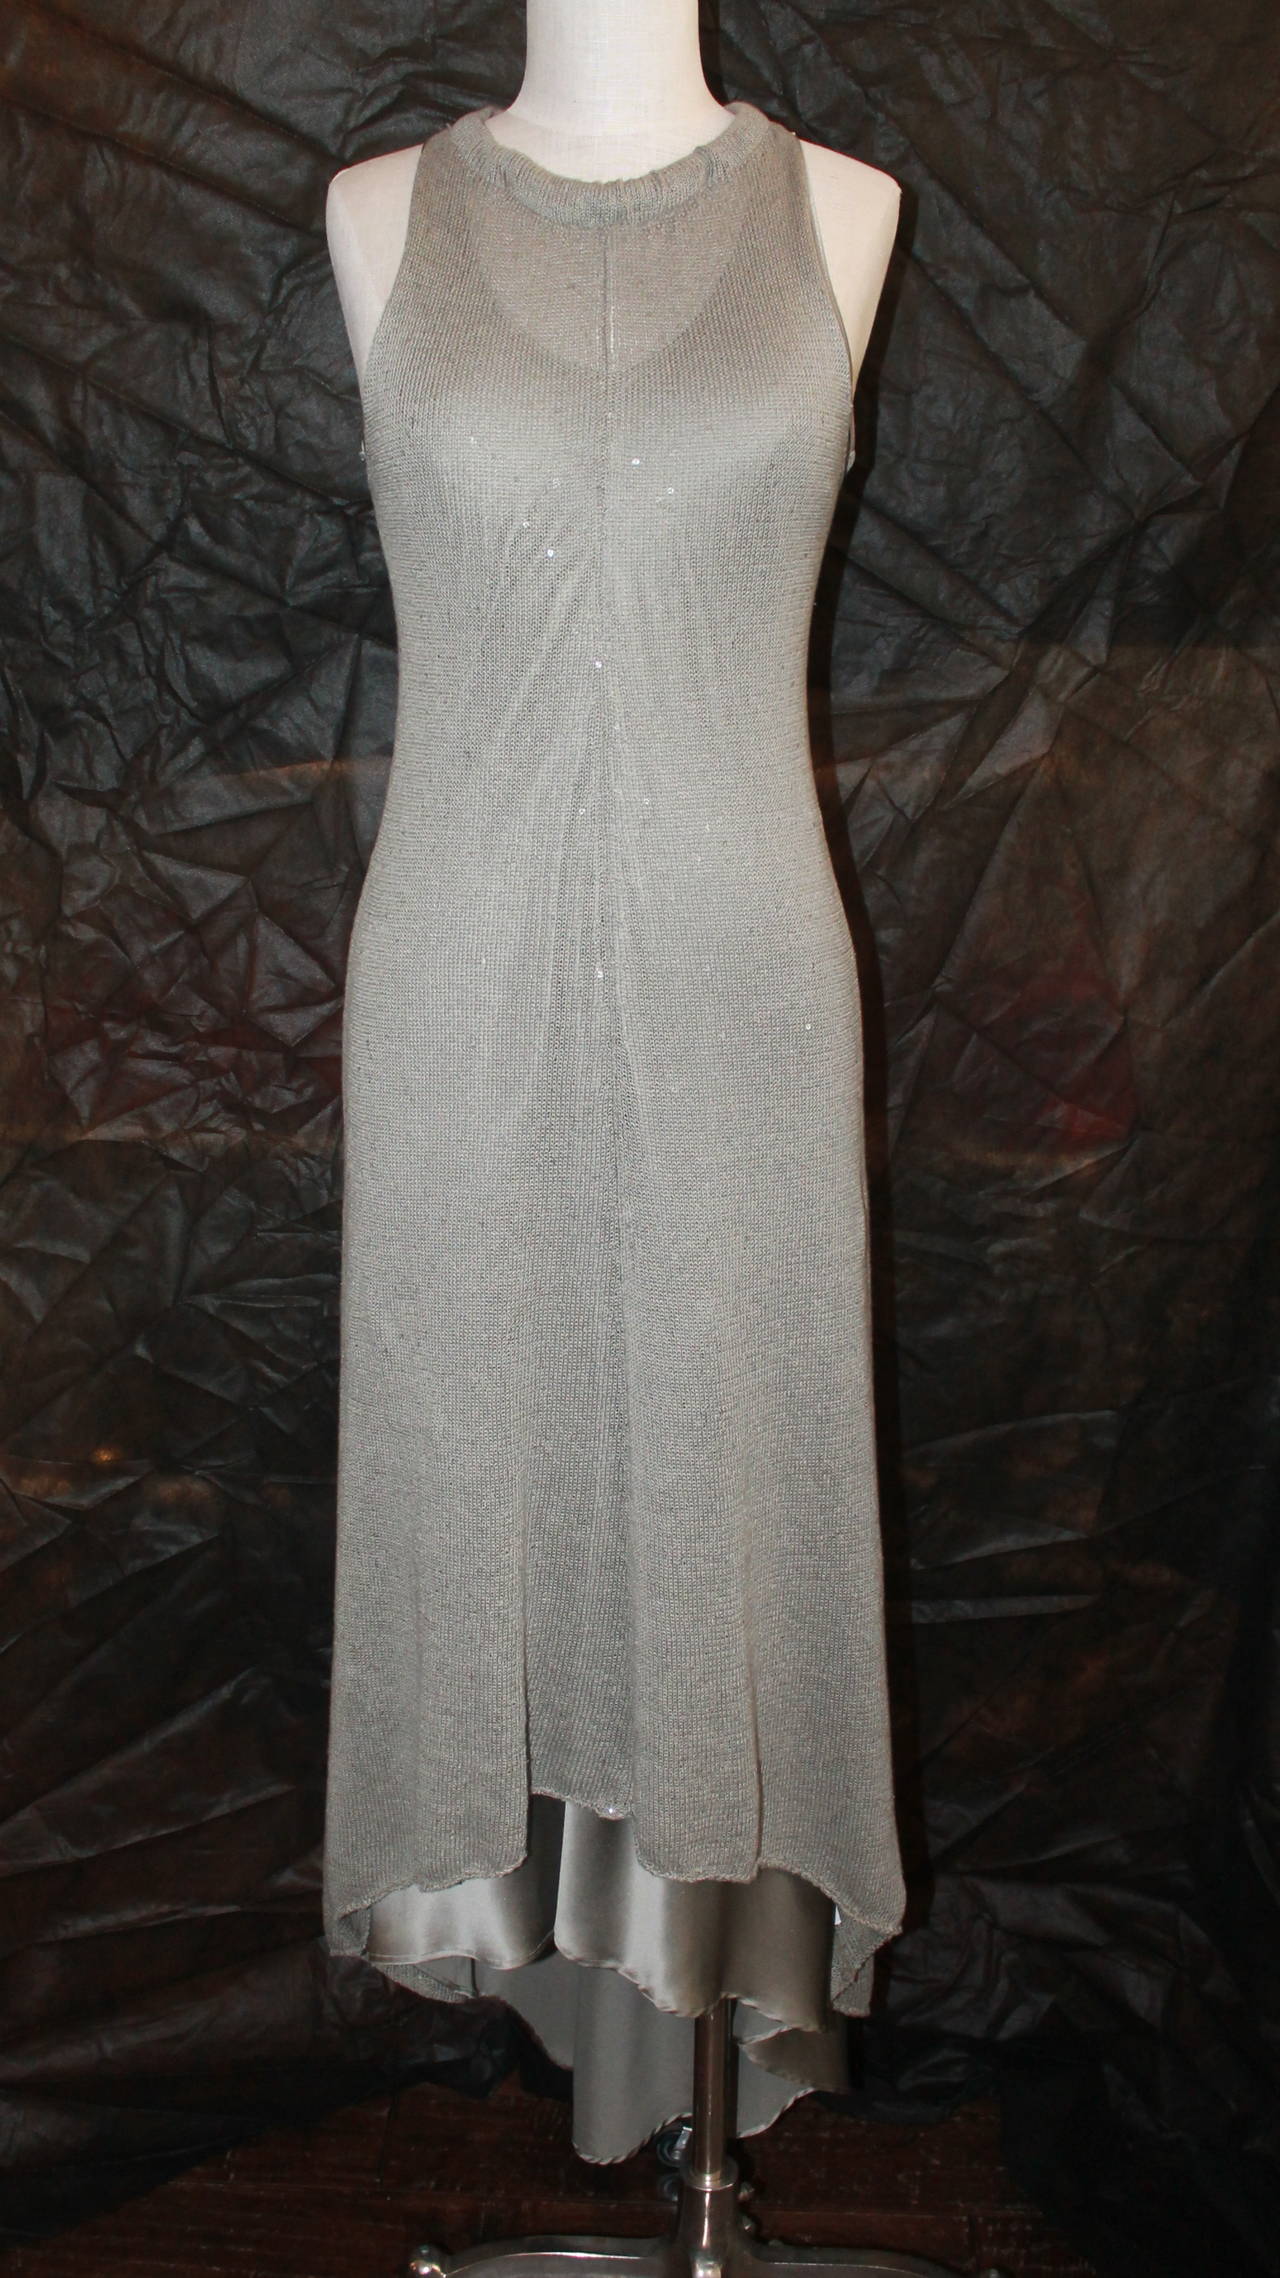 Brunello Cucinelli Taupe Knit High-Low Dress - S. This dress is in excellent condition and has a silk dress underneath. The knit fabric has clear sequins throughout. 

Measurements:
Bust- 28